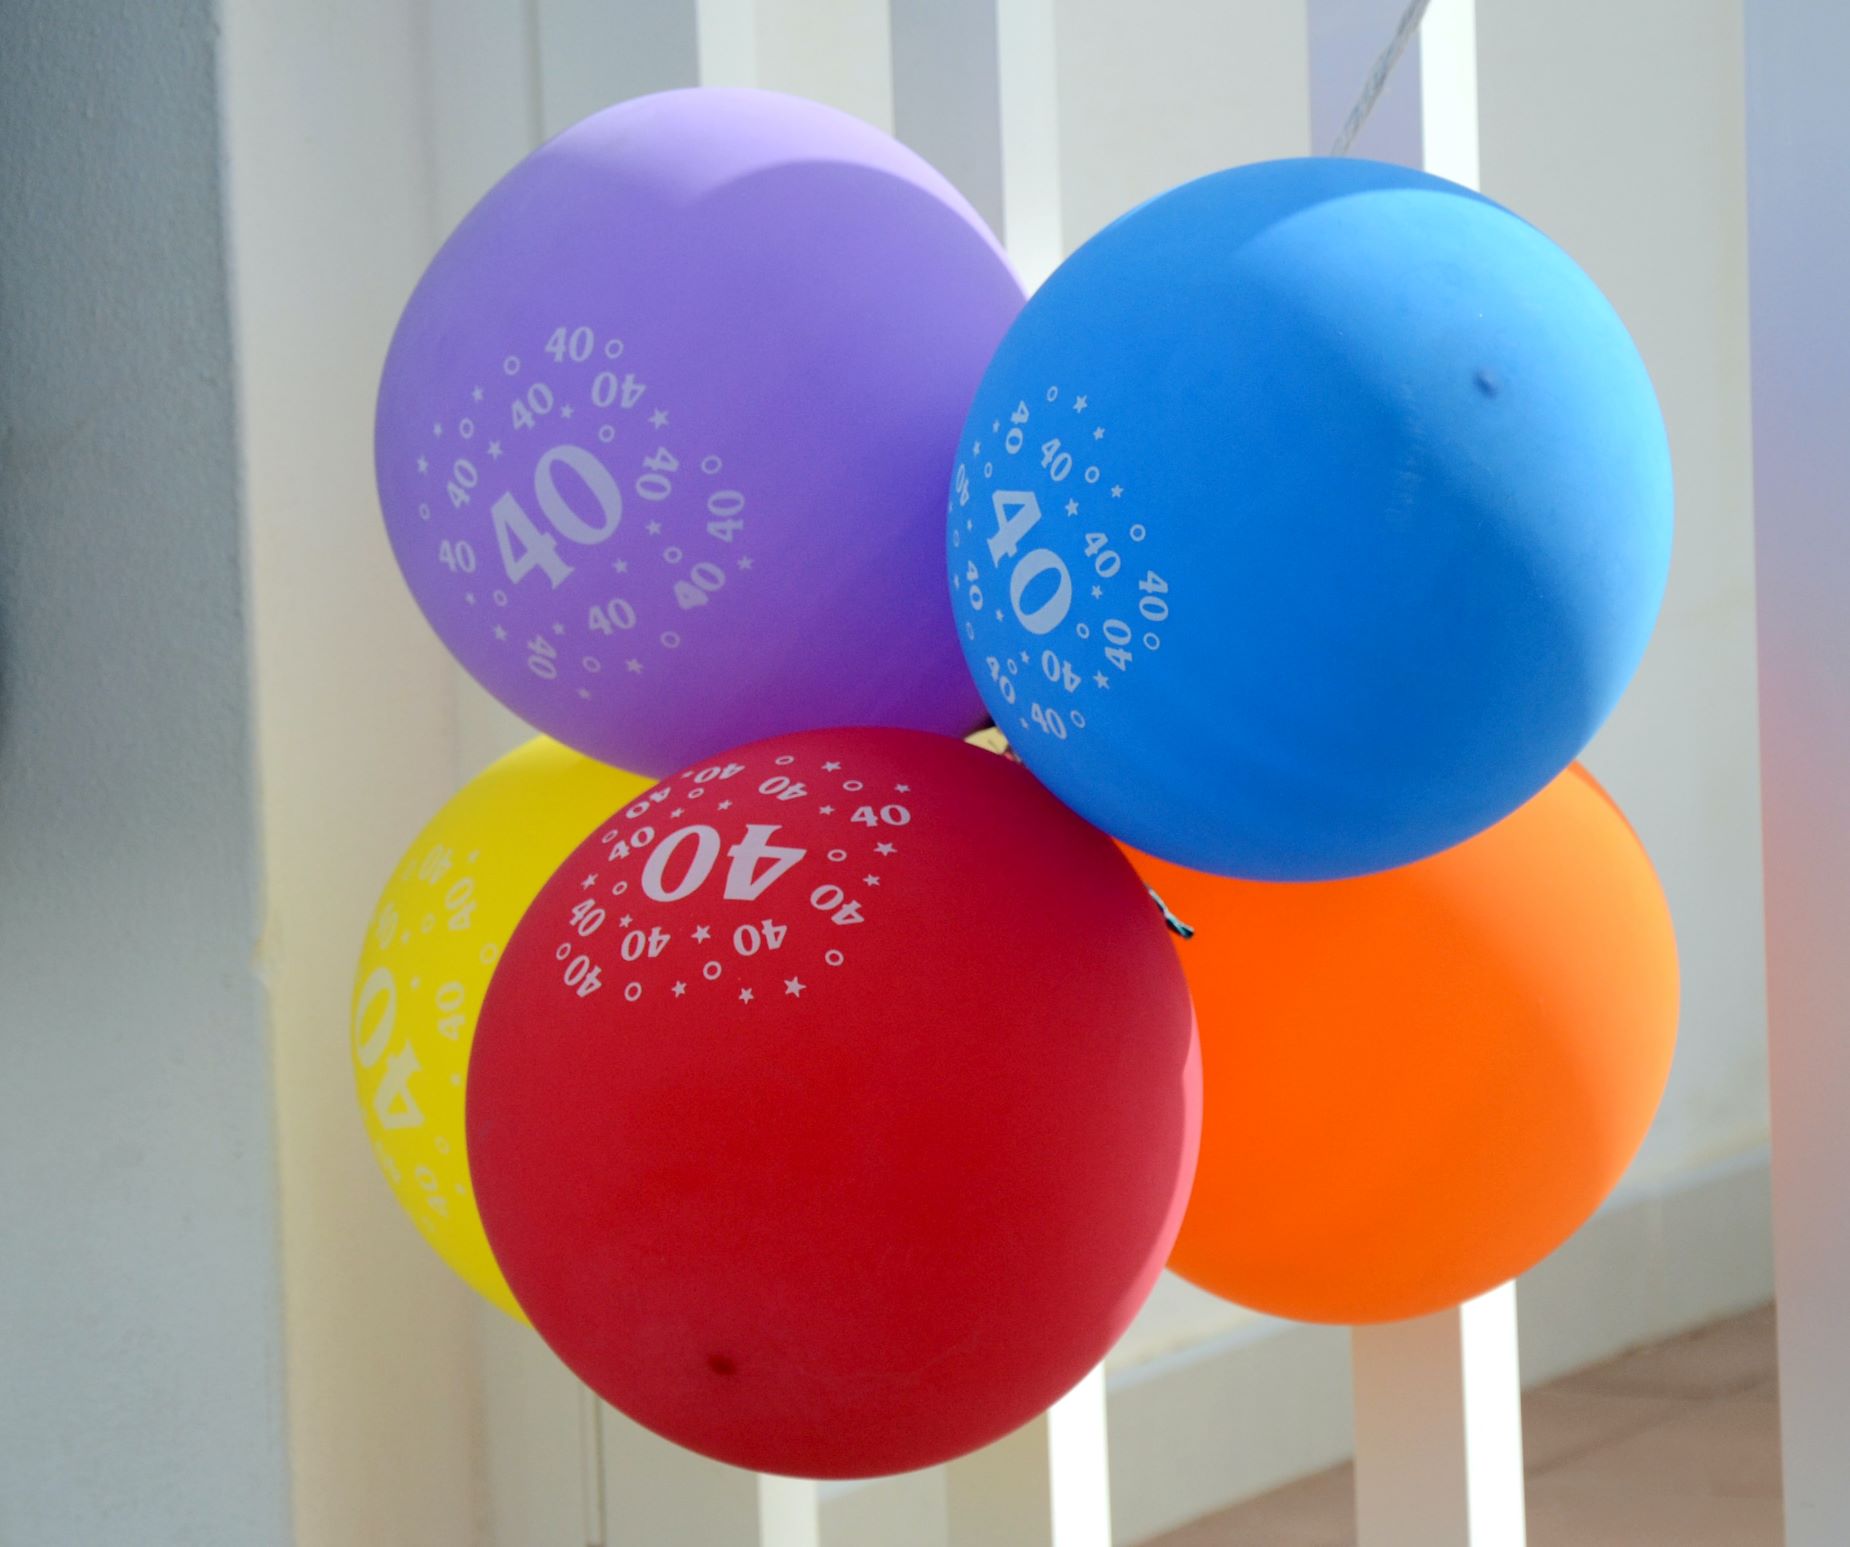 An image of balloons with the number 40 on them.